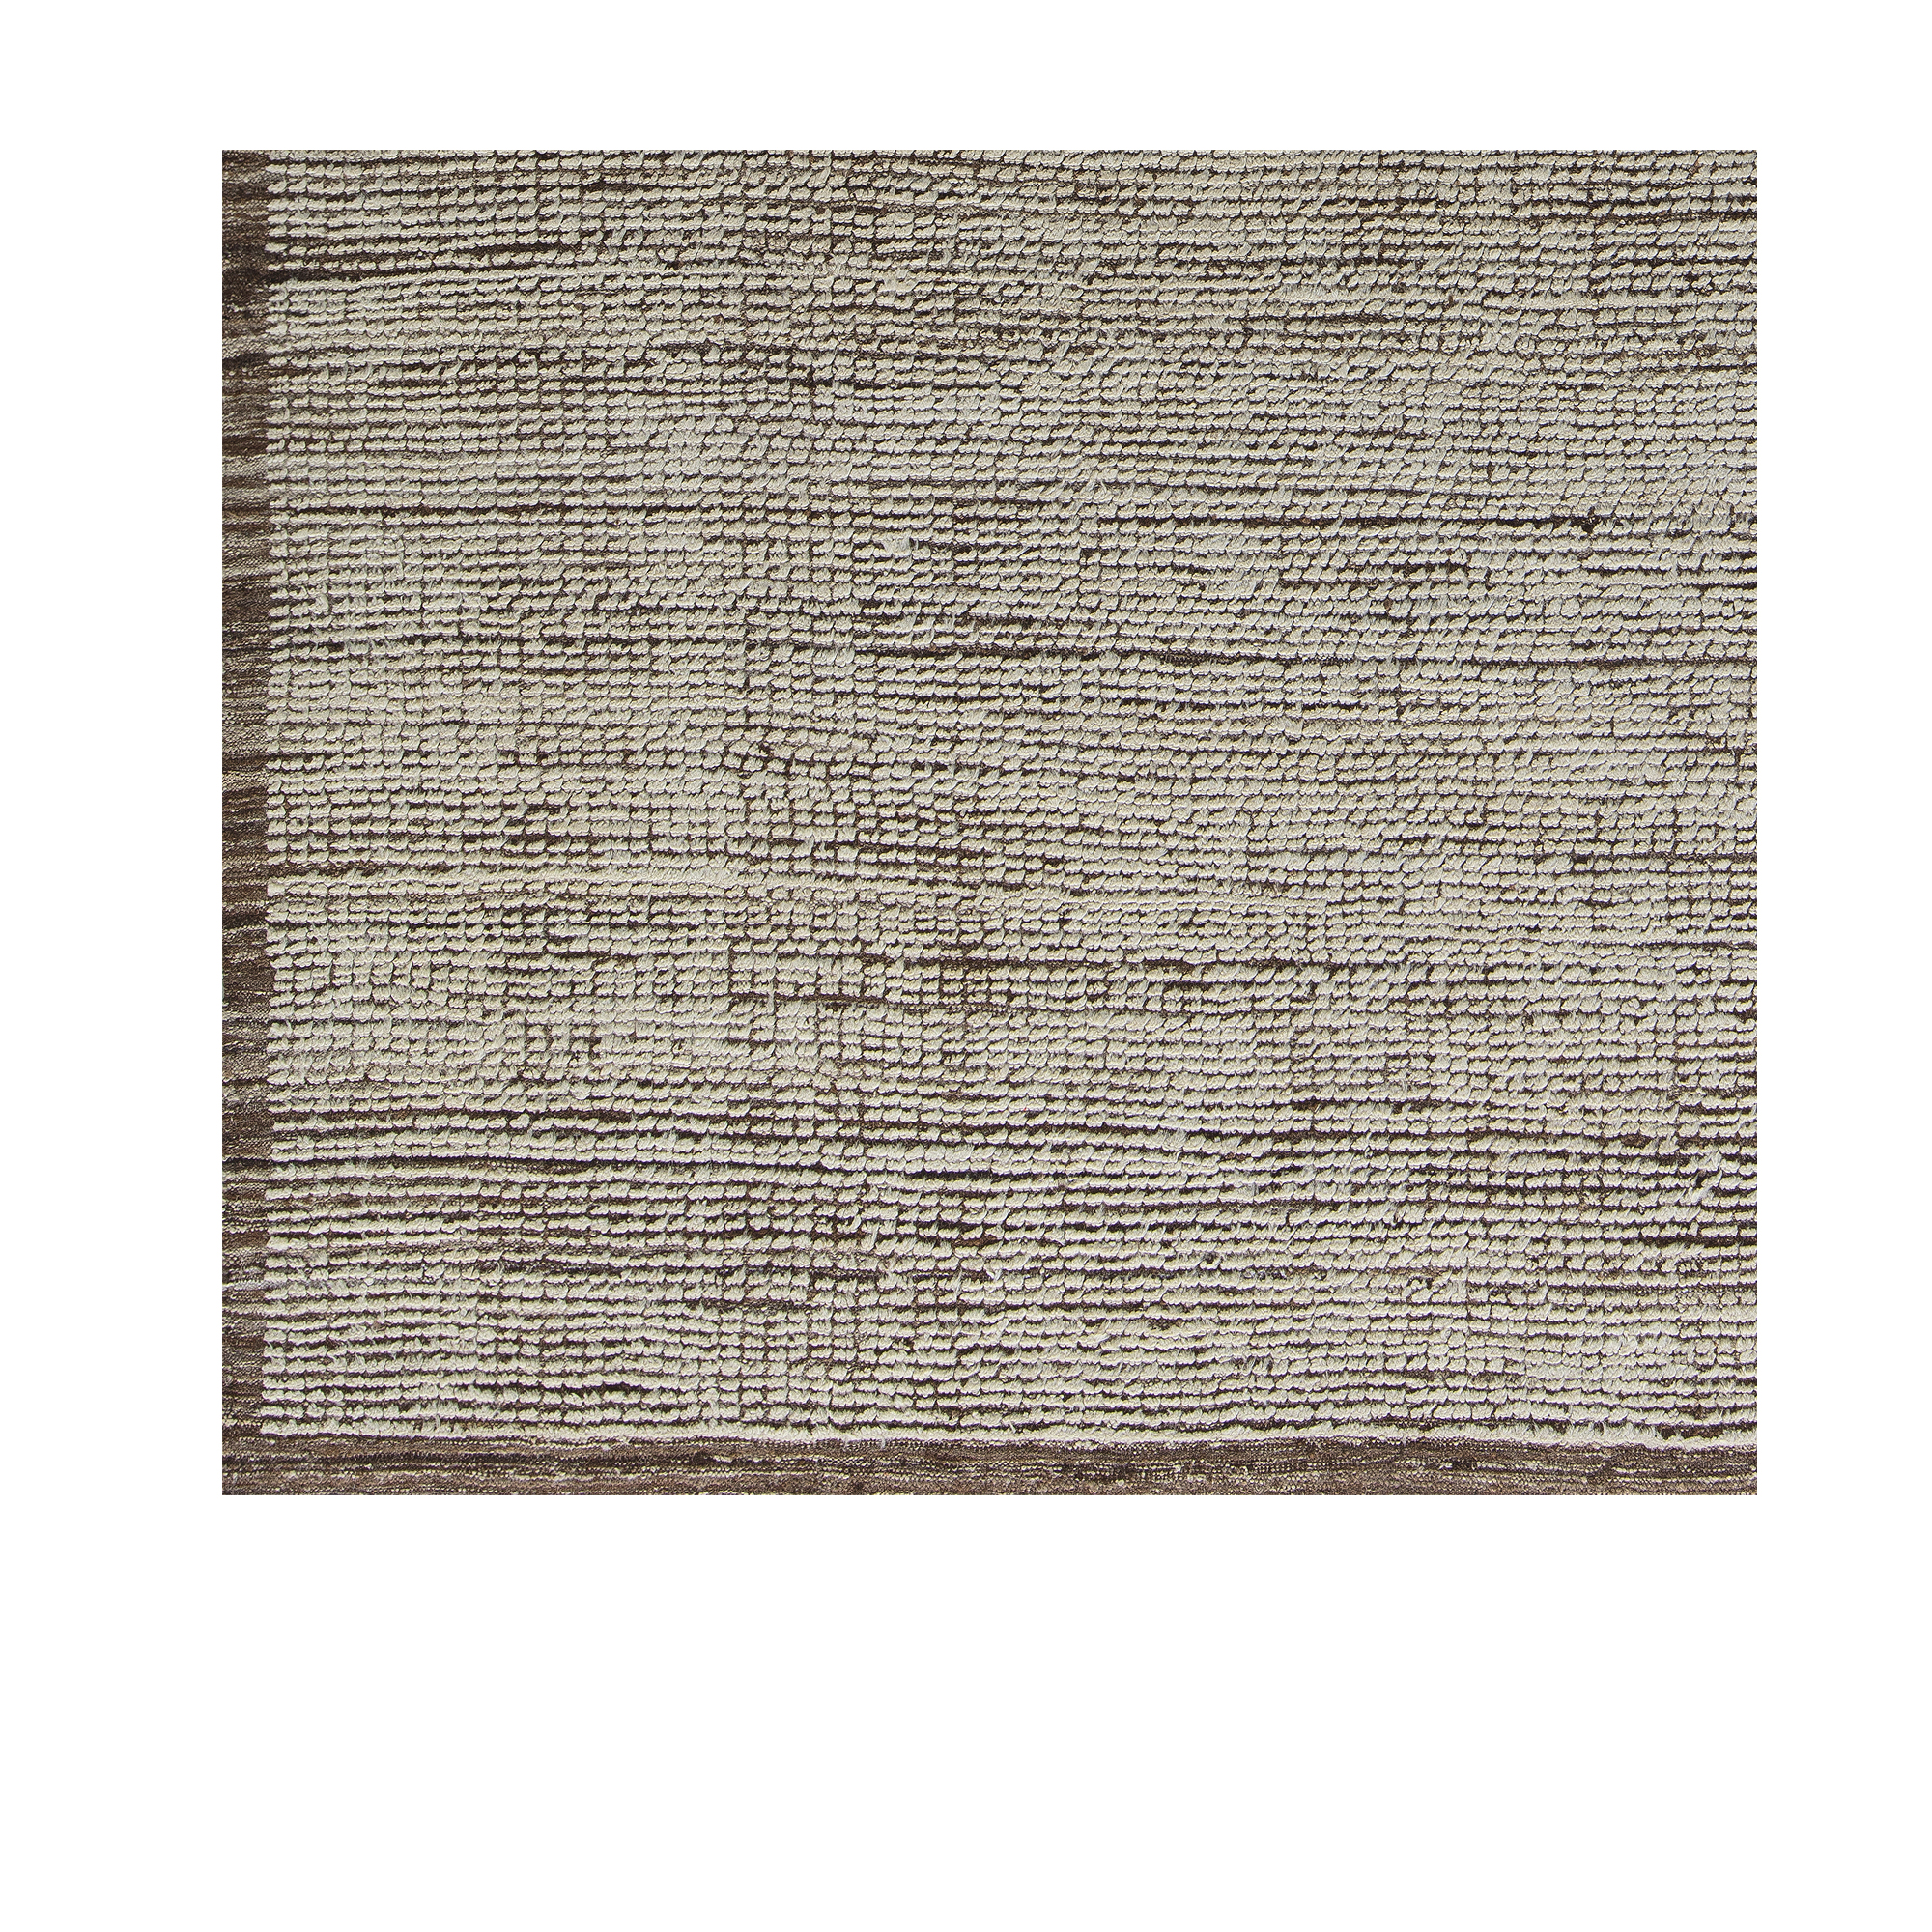 Our Relief rug is hand-knotted, and made from the finest hand-carded, hand-spun naturally dyed wool with silk accent.